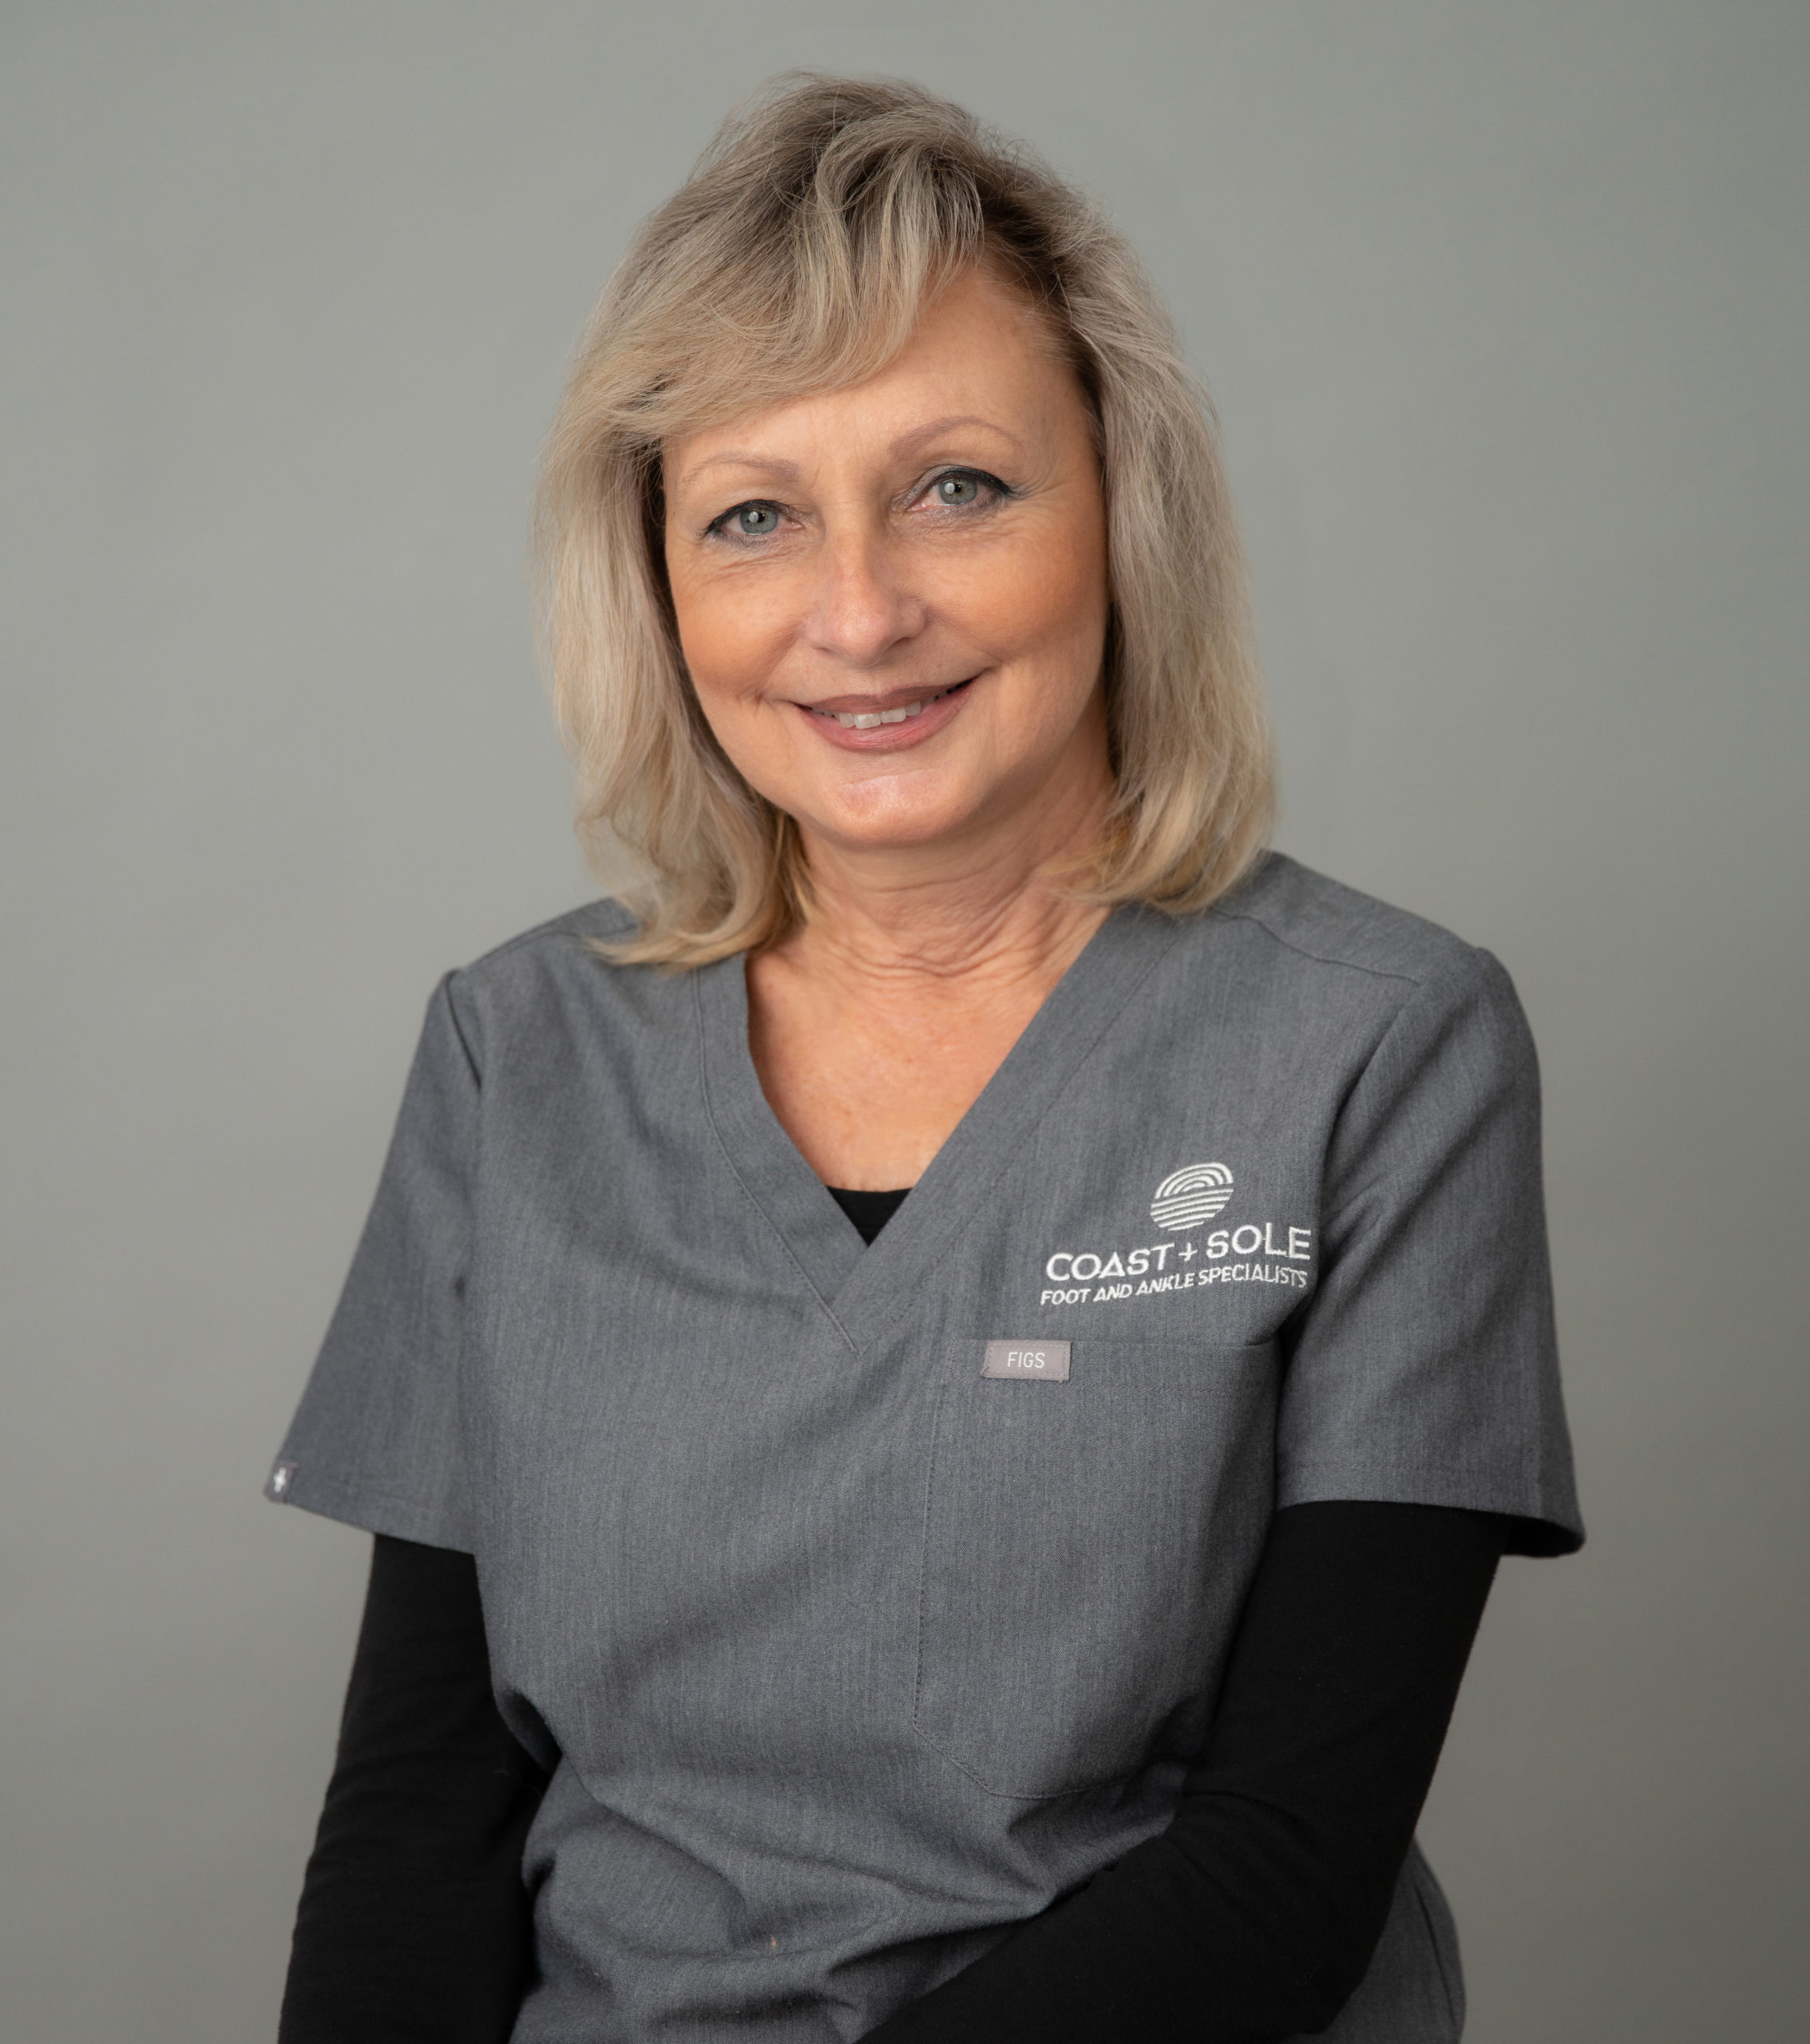 Irena Ackley Certified Medical Assistant - Coast and Sole Foot and ankle specialist